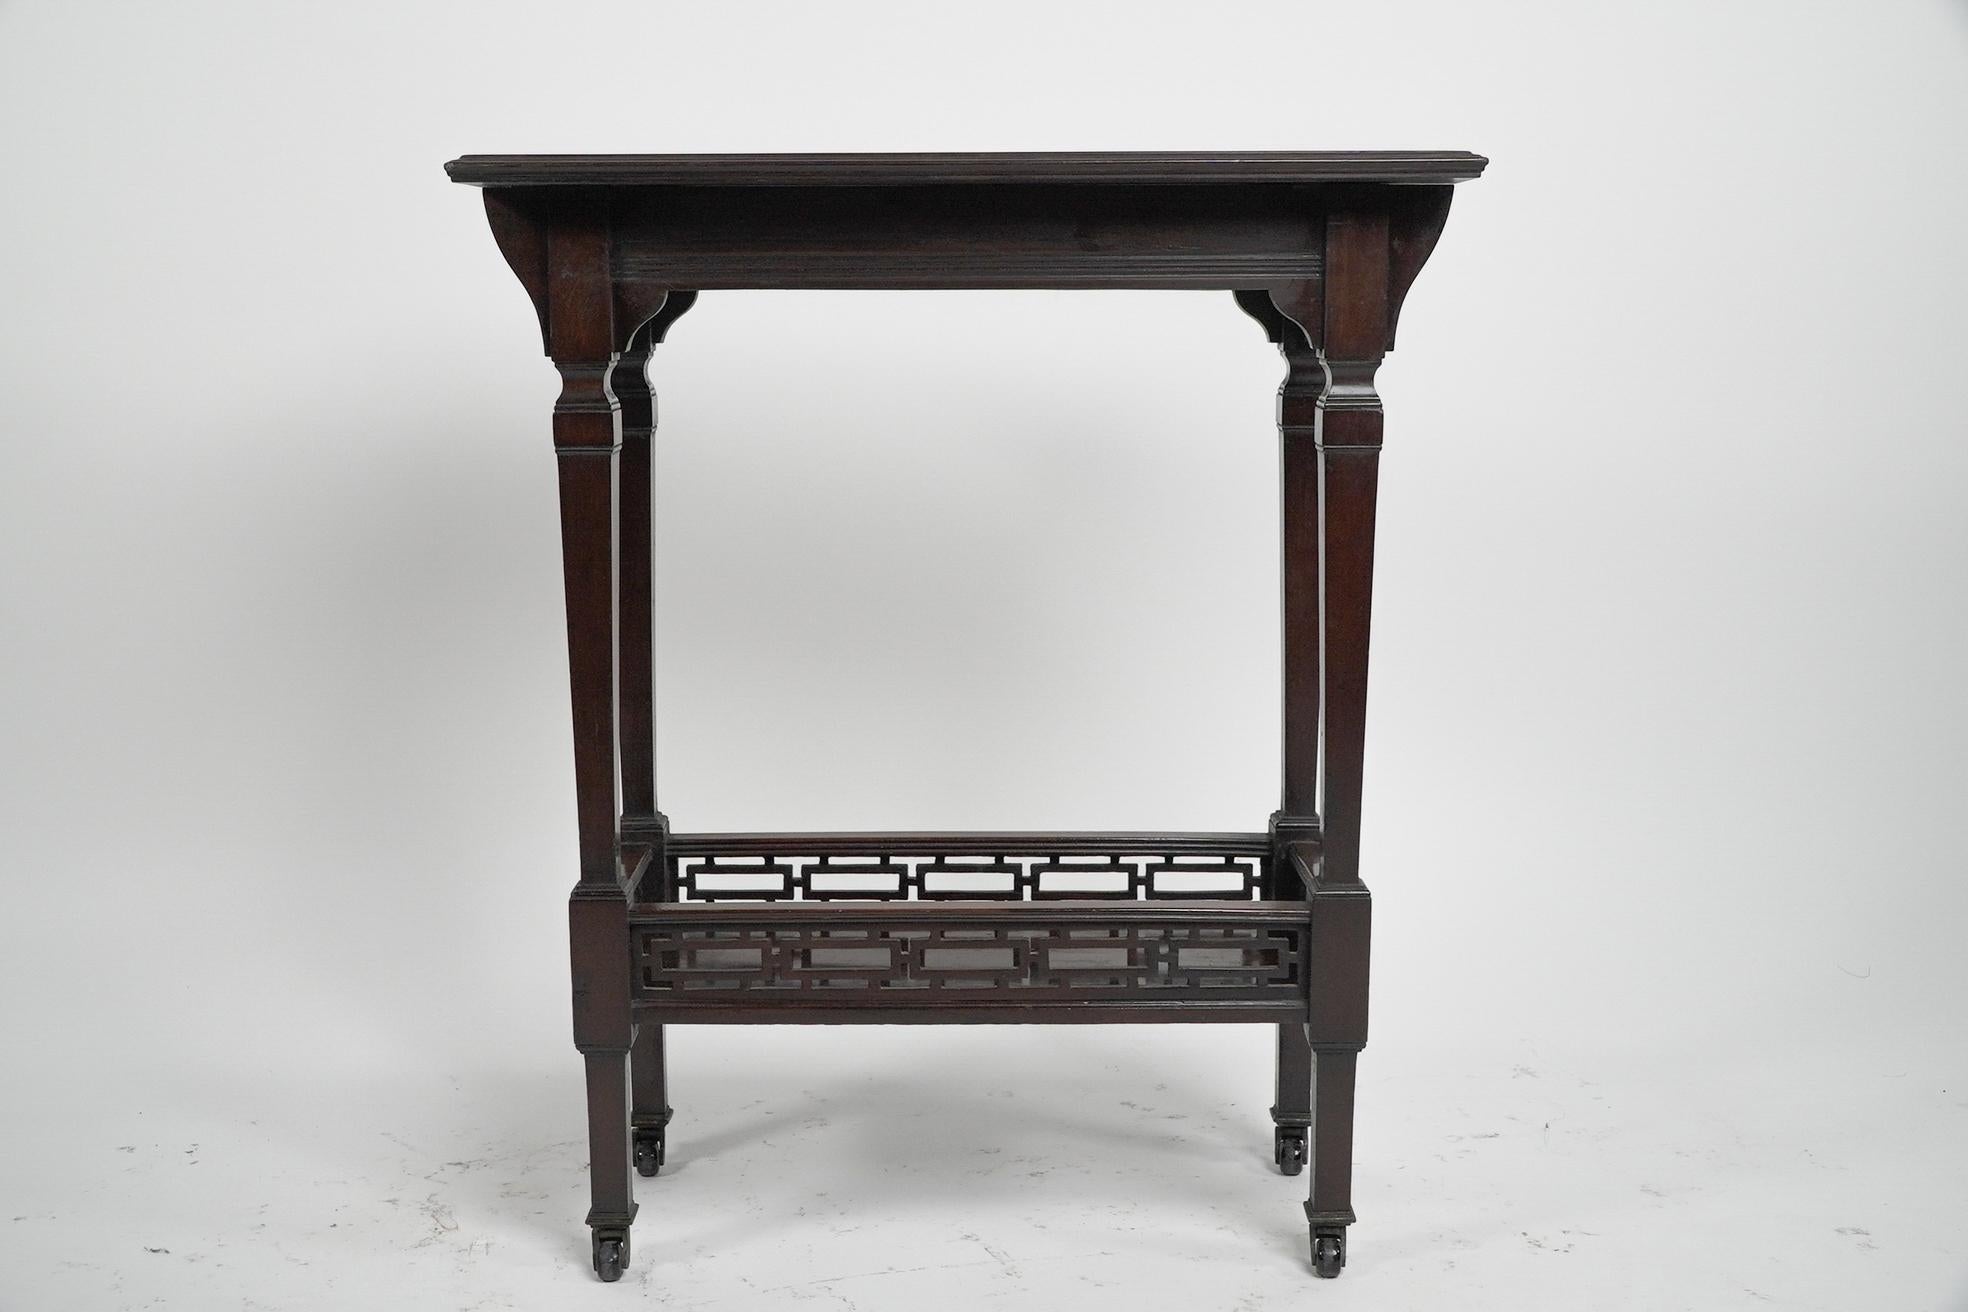 Collinson & Lock Attributed. A small Aesthetic Movement Mahogany side table with raised Japanese fretwork to the lower shelf.